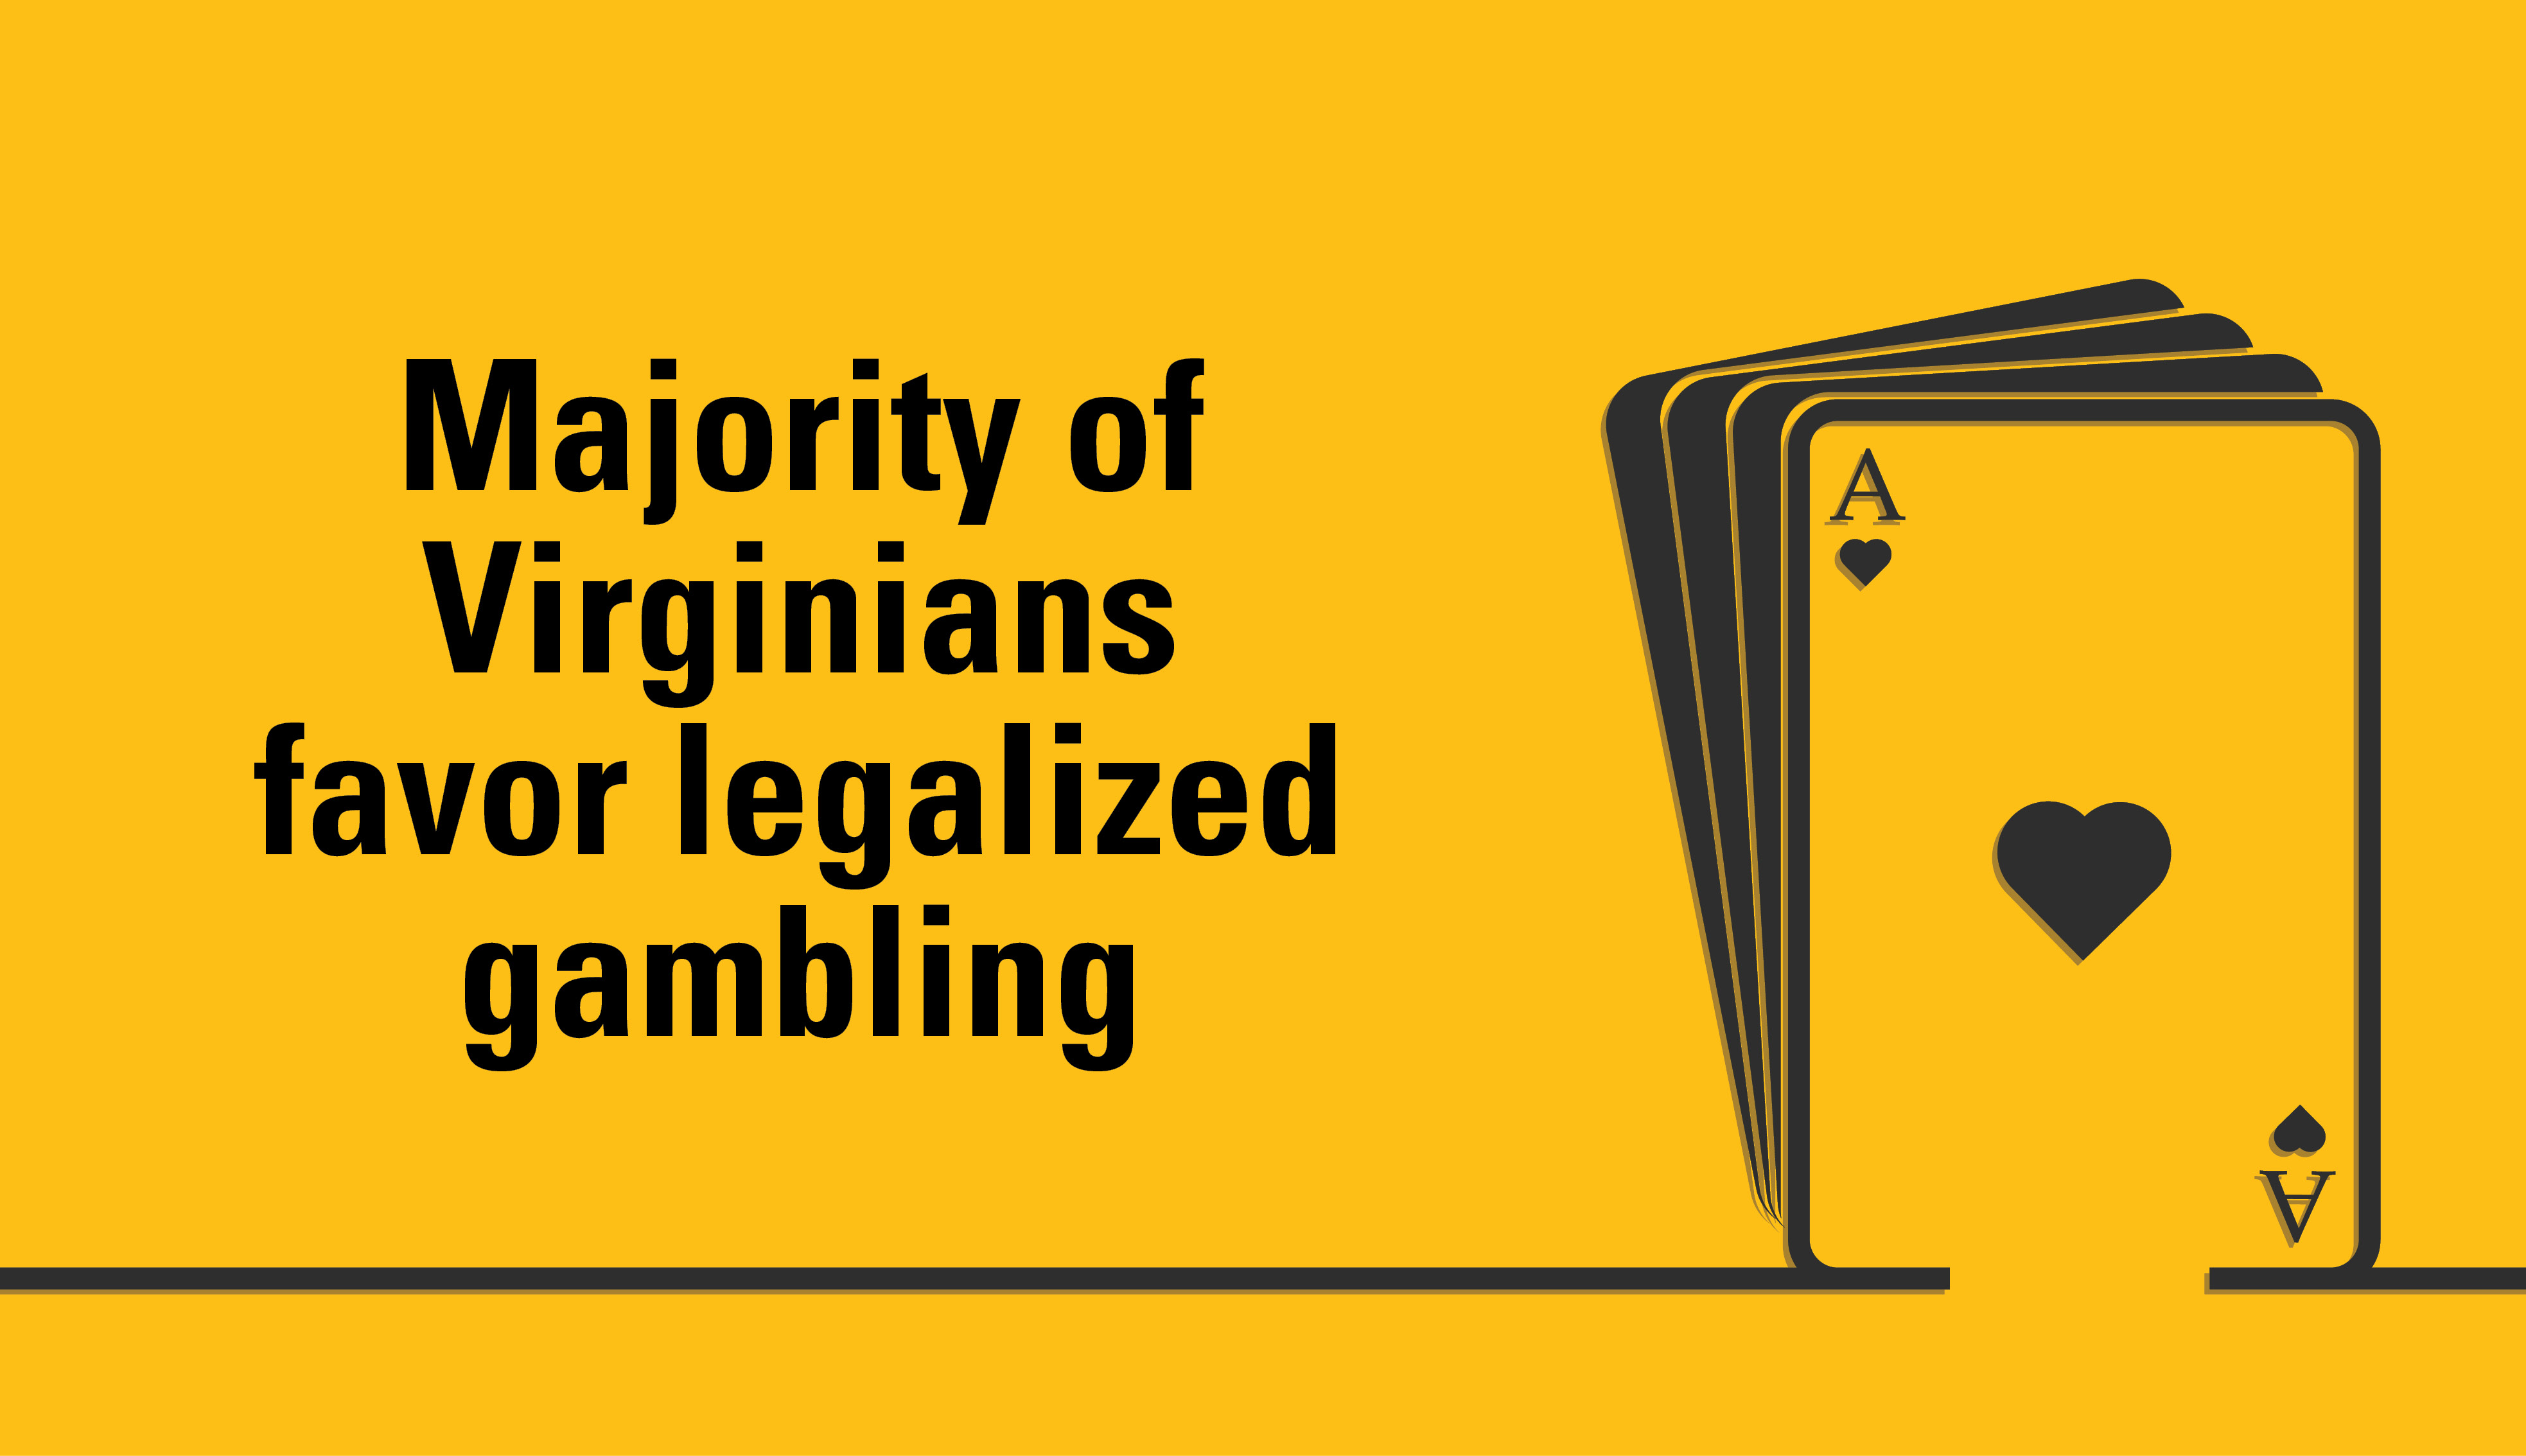 With the scheduled release today, 11/25/19, of the JLARC study on gambling in Virginia, the results of a statewide poll released in late October by the VCU Wilder School offers additional perspective on how Virginians feel about gambling.